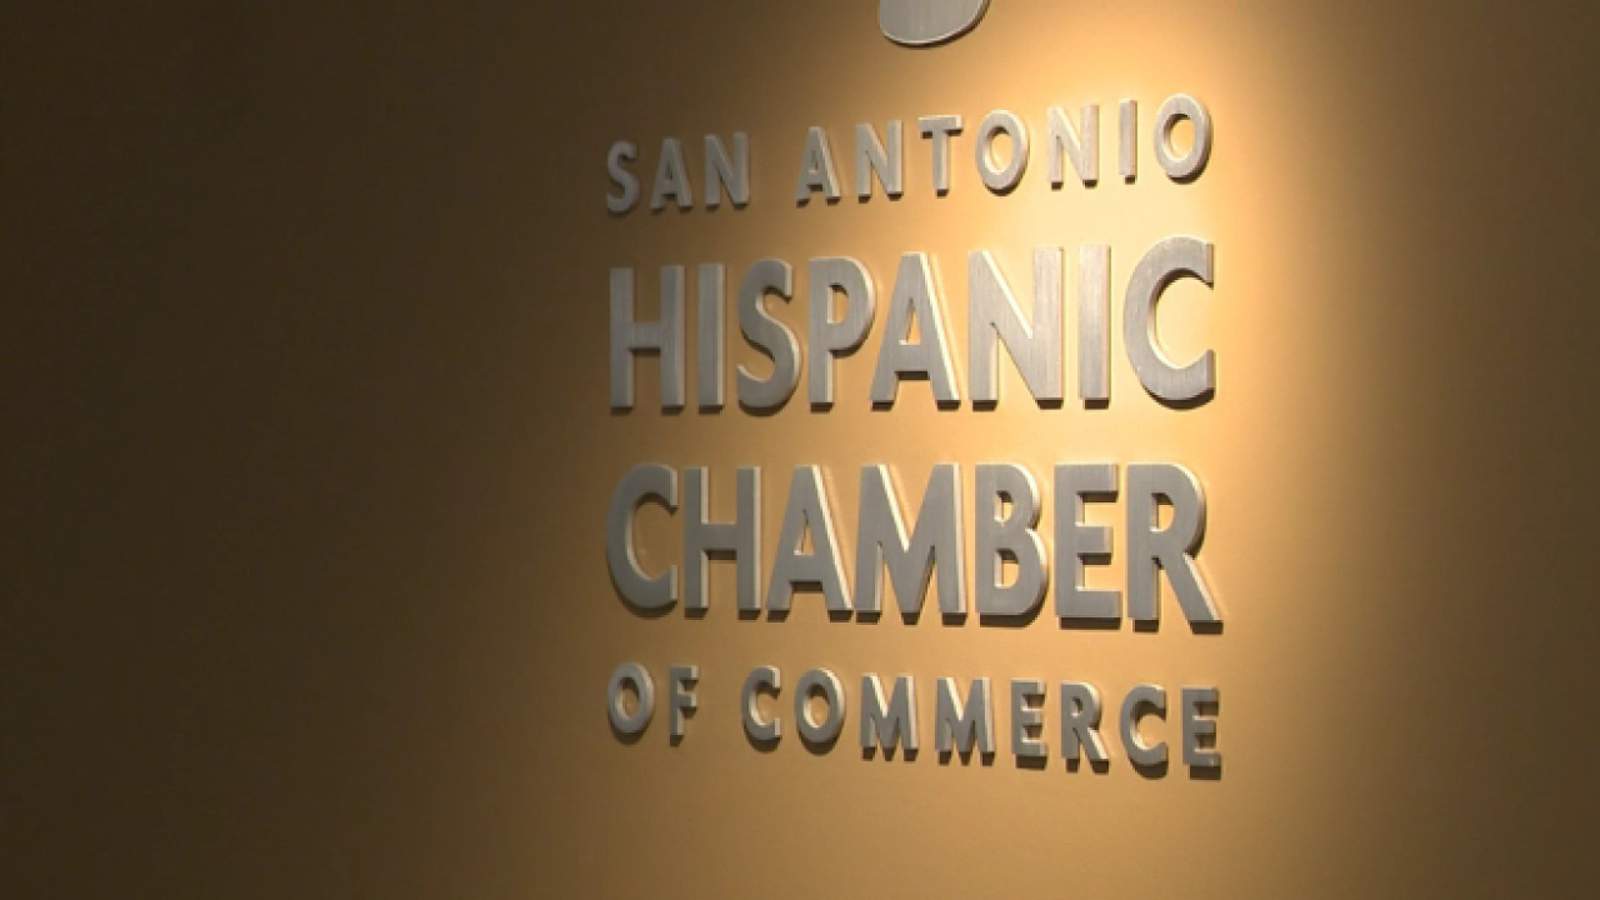 San Antonio Hispanic Chamber of Commerce helping businesses stay open during pandemic